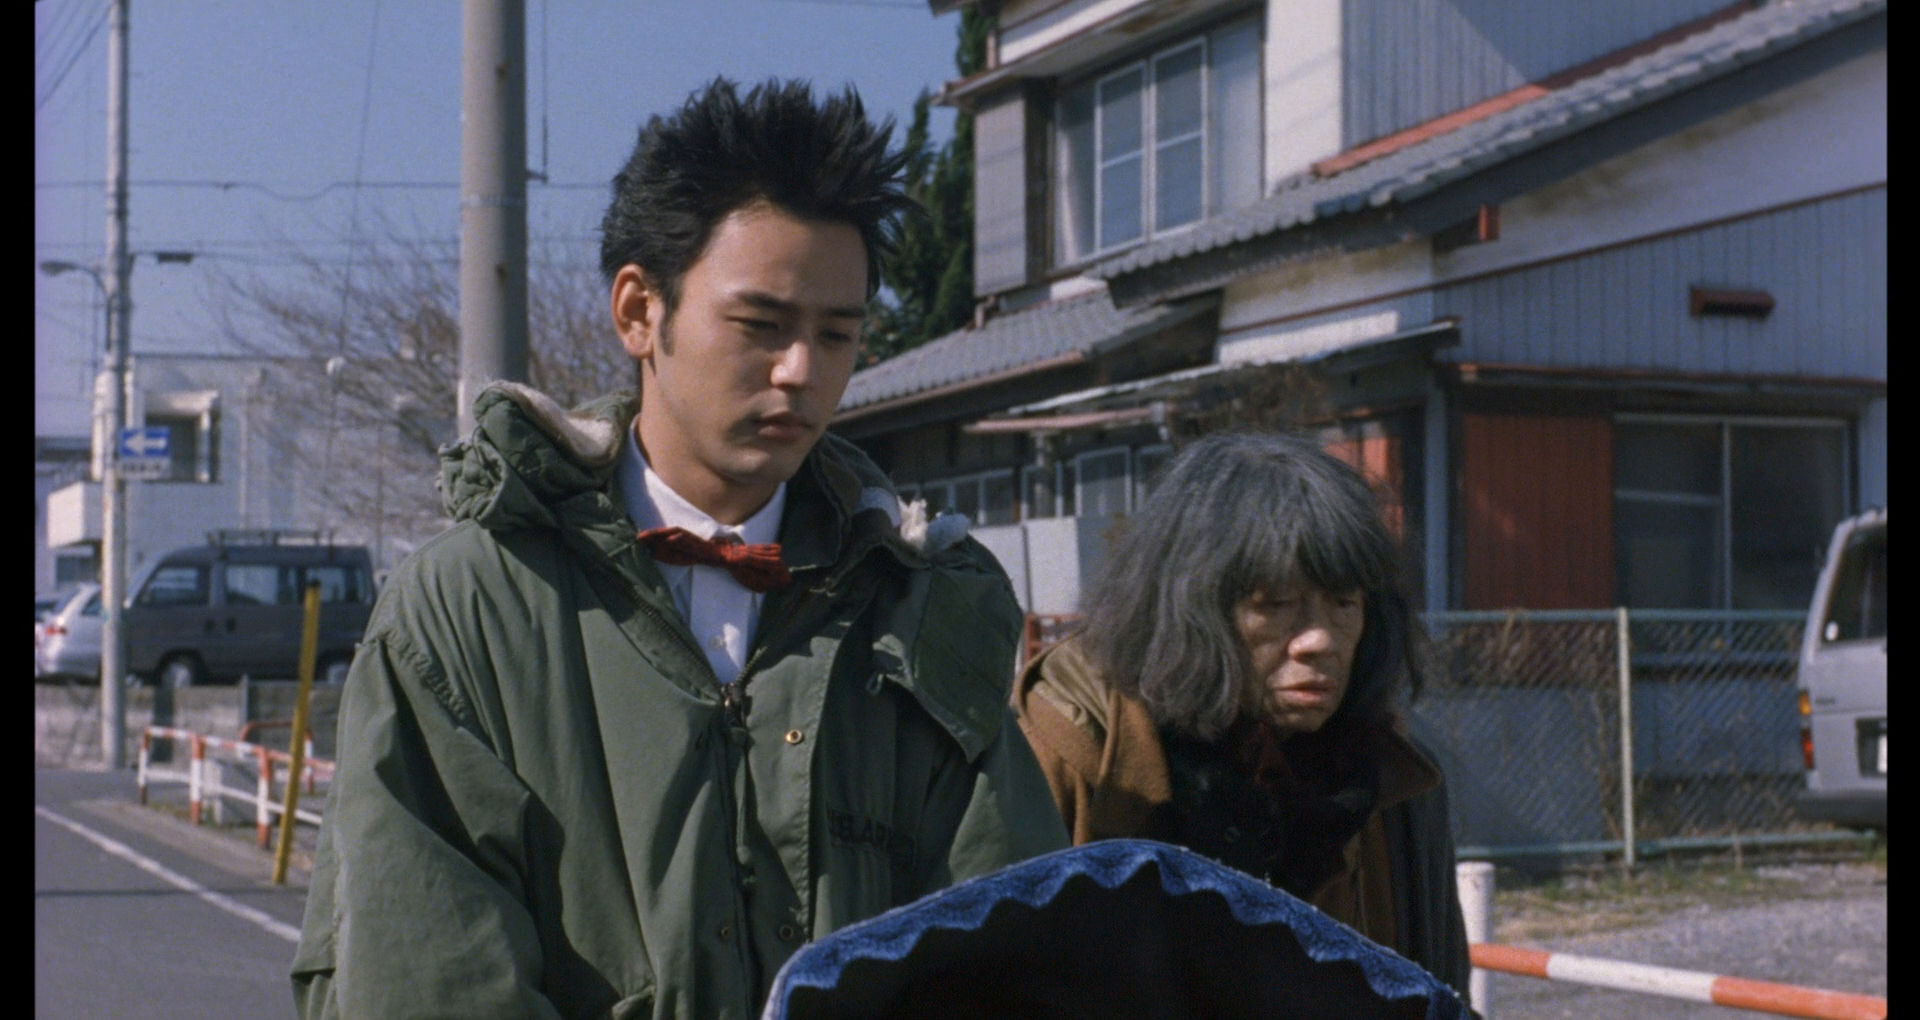 Jose뻢 Josee.the.Tiger.and.the.Fish.2003.JAPANESE.1080p.BluRay.x264-WiKi 13.5-3.png